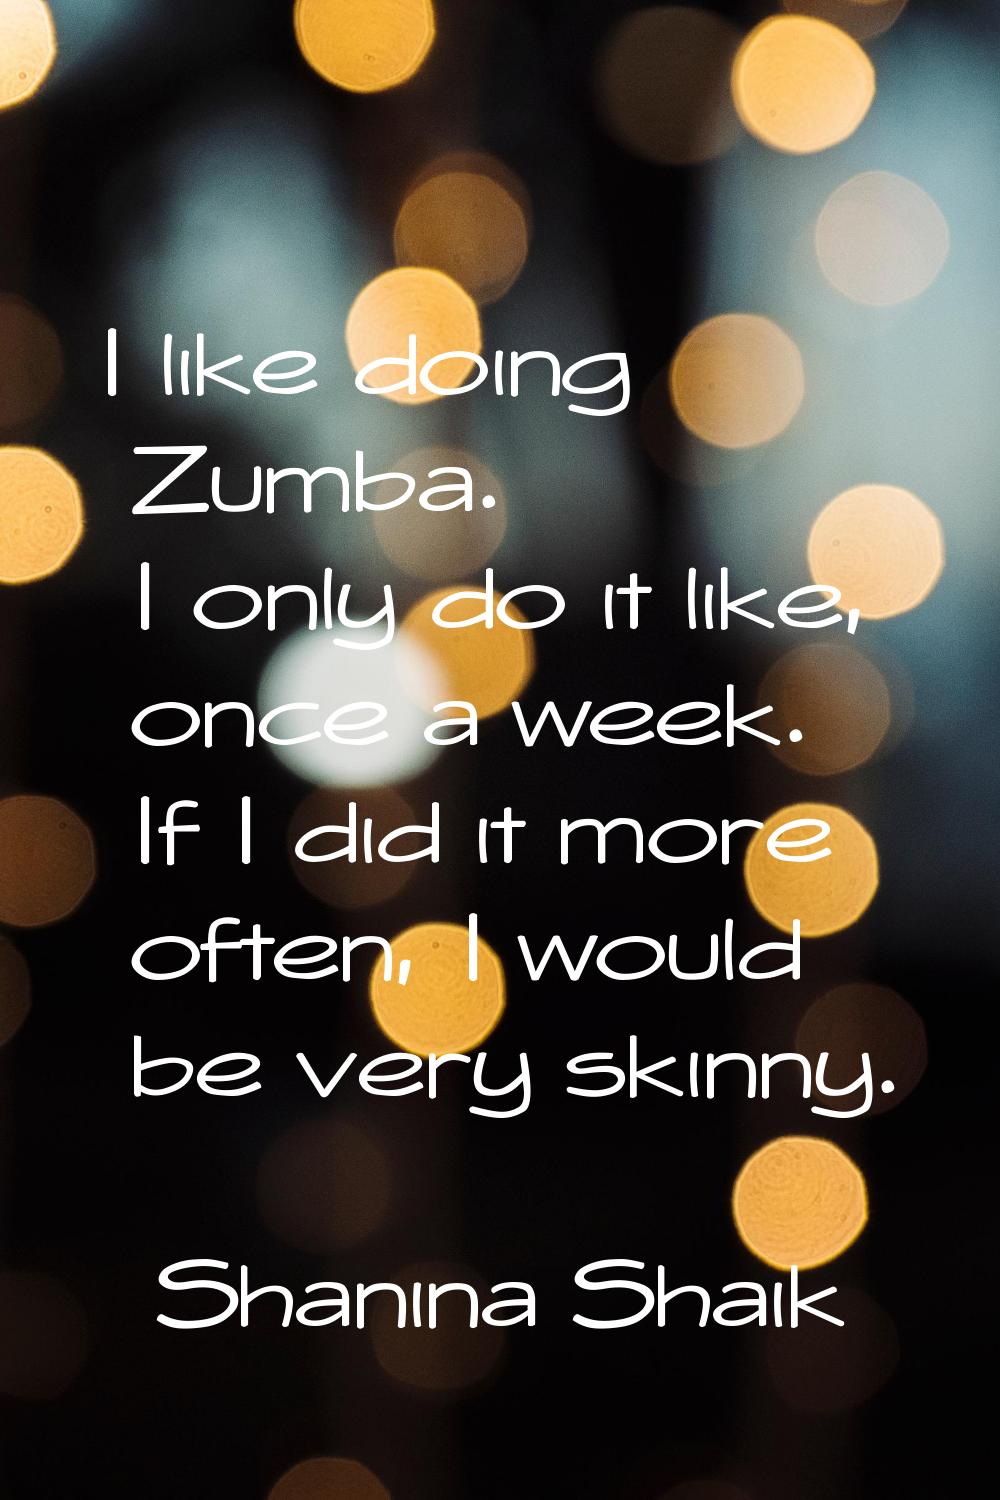 I like doing Zumba. I only do it like, once a week. If I did it more often, I would be very skinny.